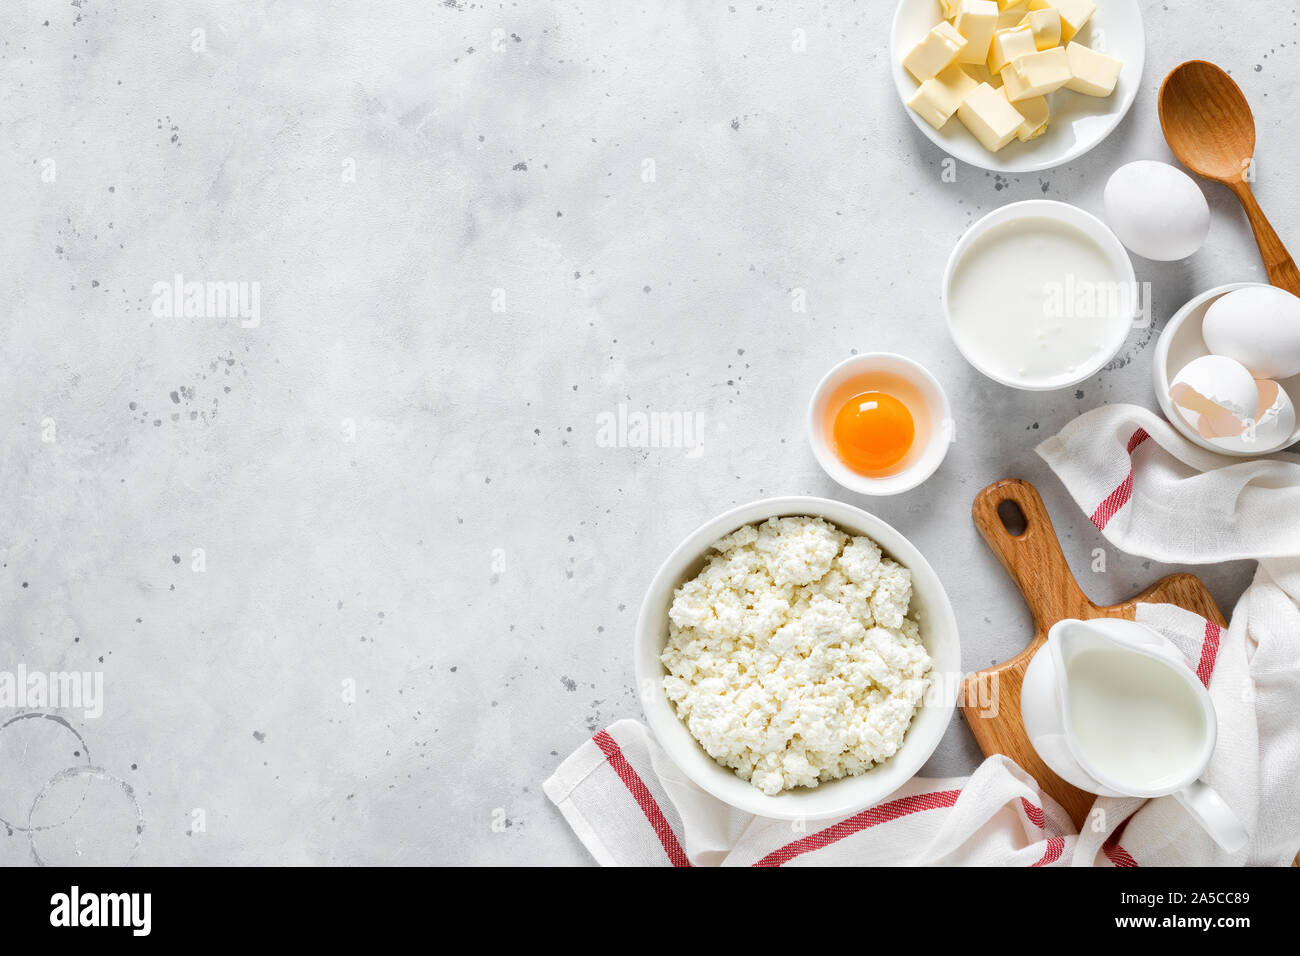 Pitcher with milk, egg, cottage cheese, butter and yogurt on kitchen table. Ingredients for cooking on kitchen table with copy space. Culinary backgro Stock Photo